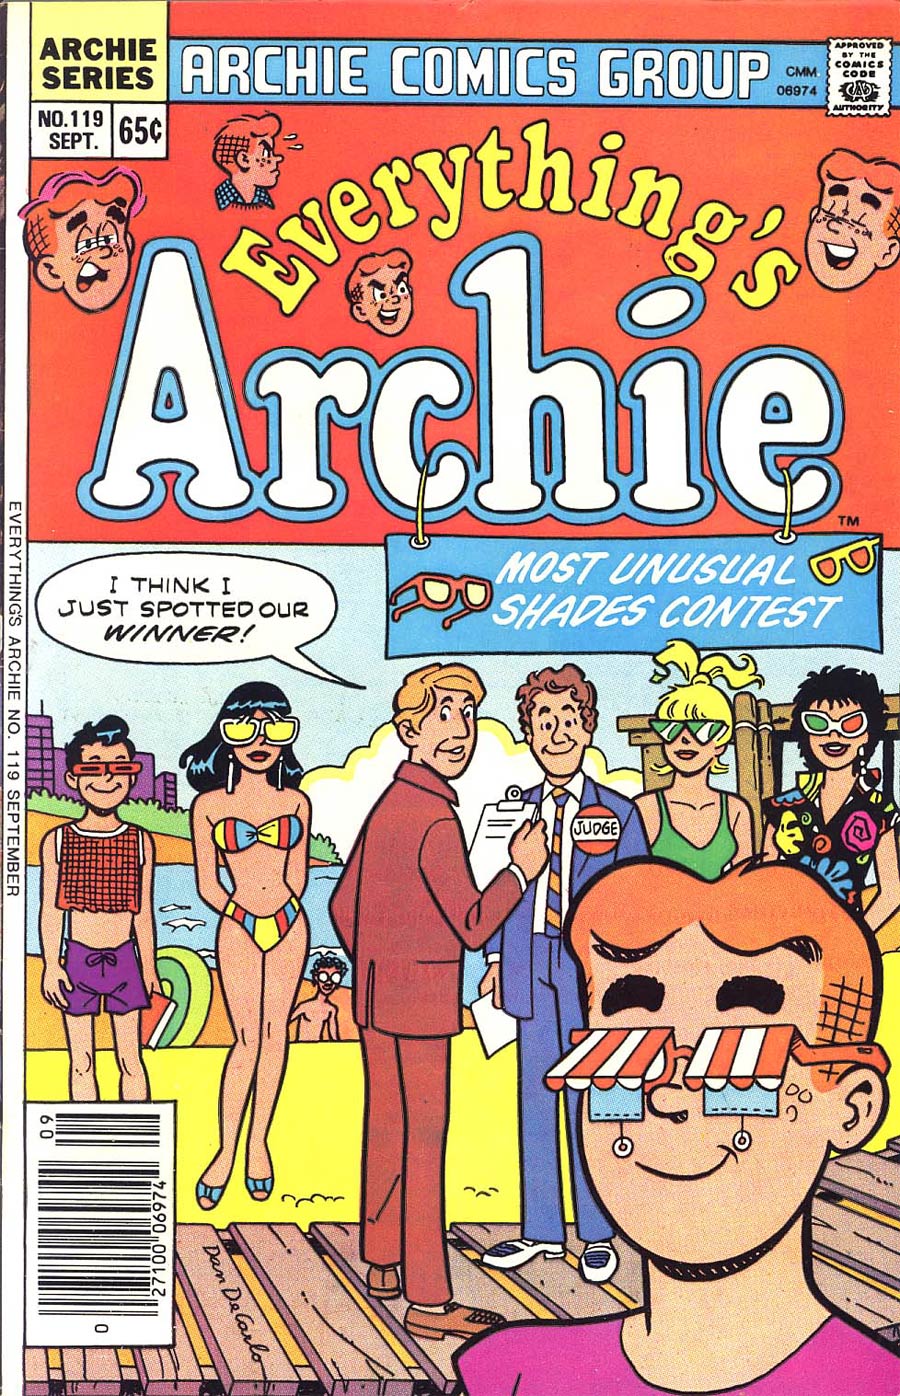 Everythings Archie #119